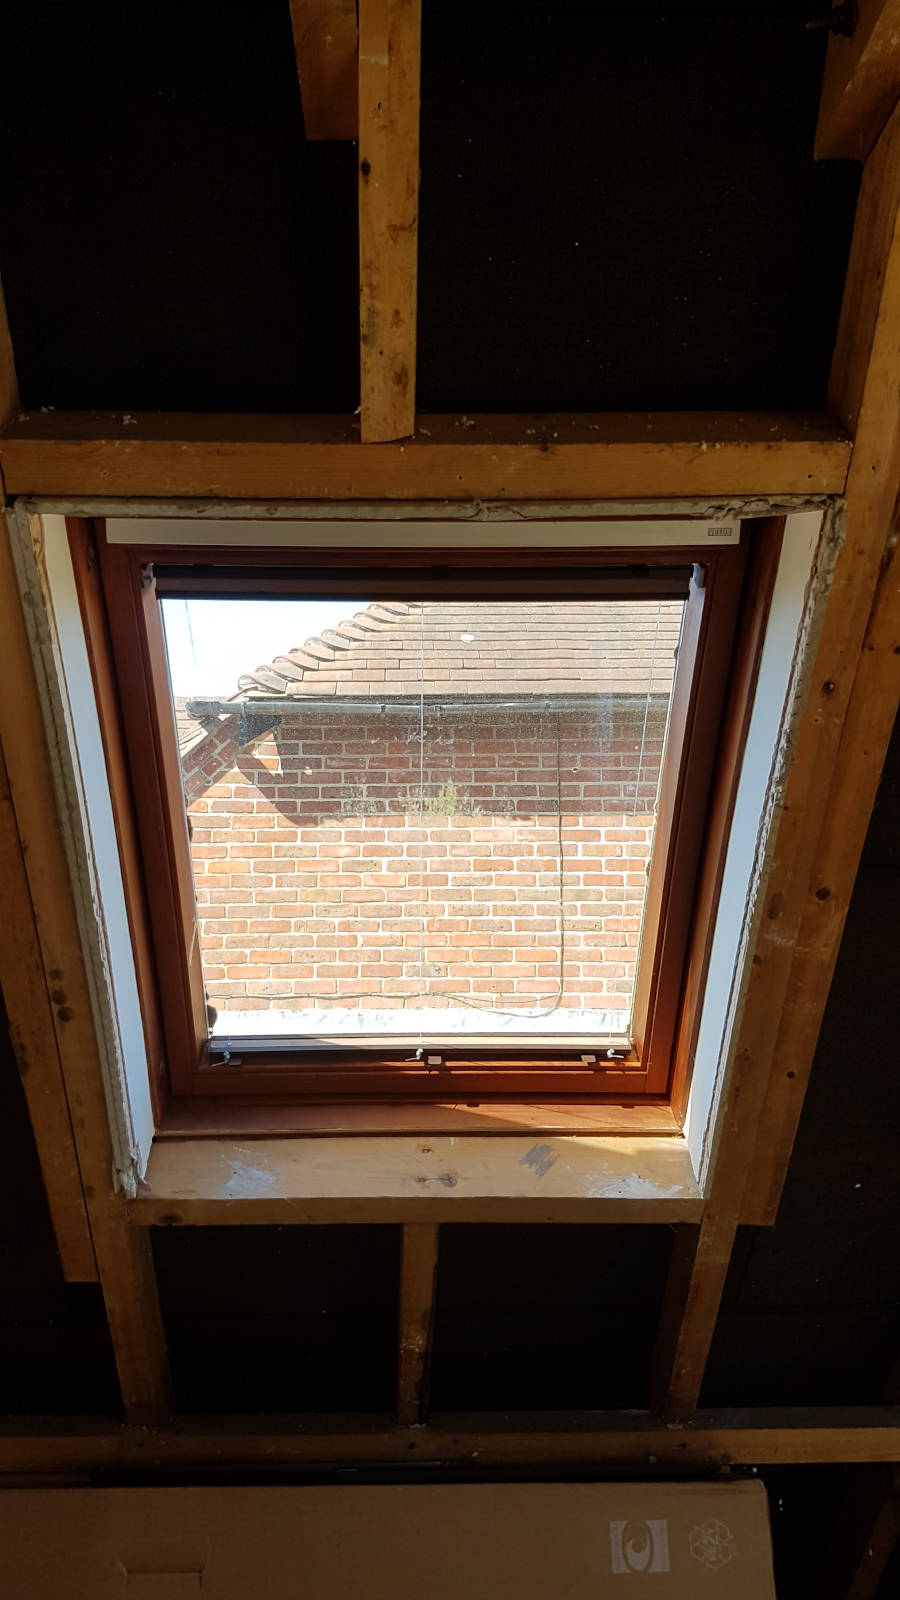 Image of chichester bathroom velux skylight and blind before <h2>2021-08-06 - Bringing Light and Shade to a Bathroom in Chichester</h2>